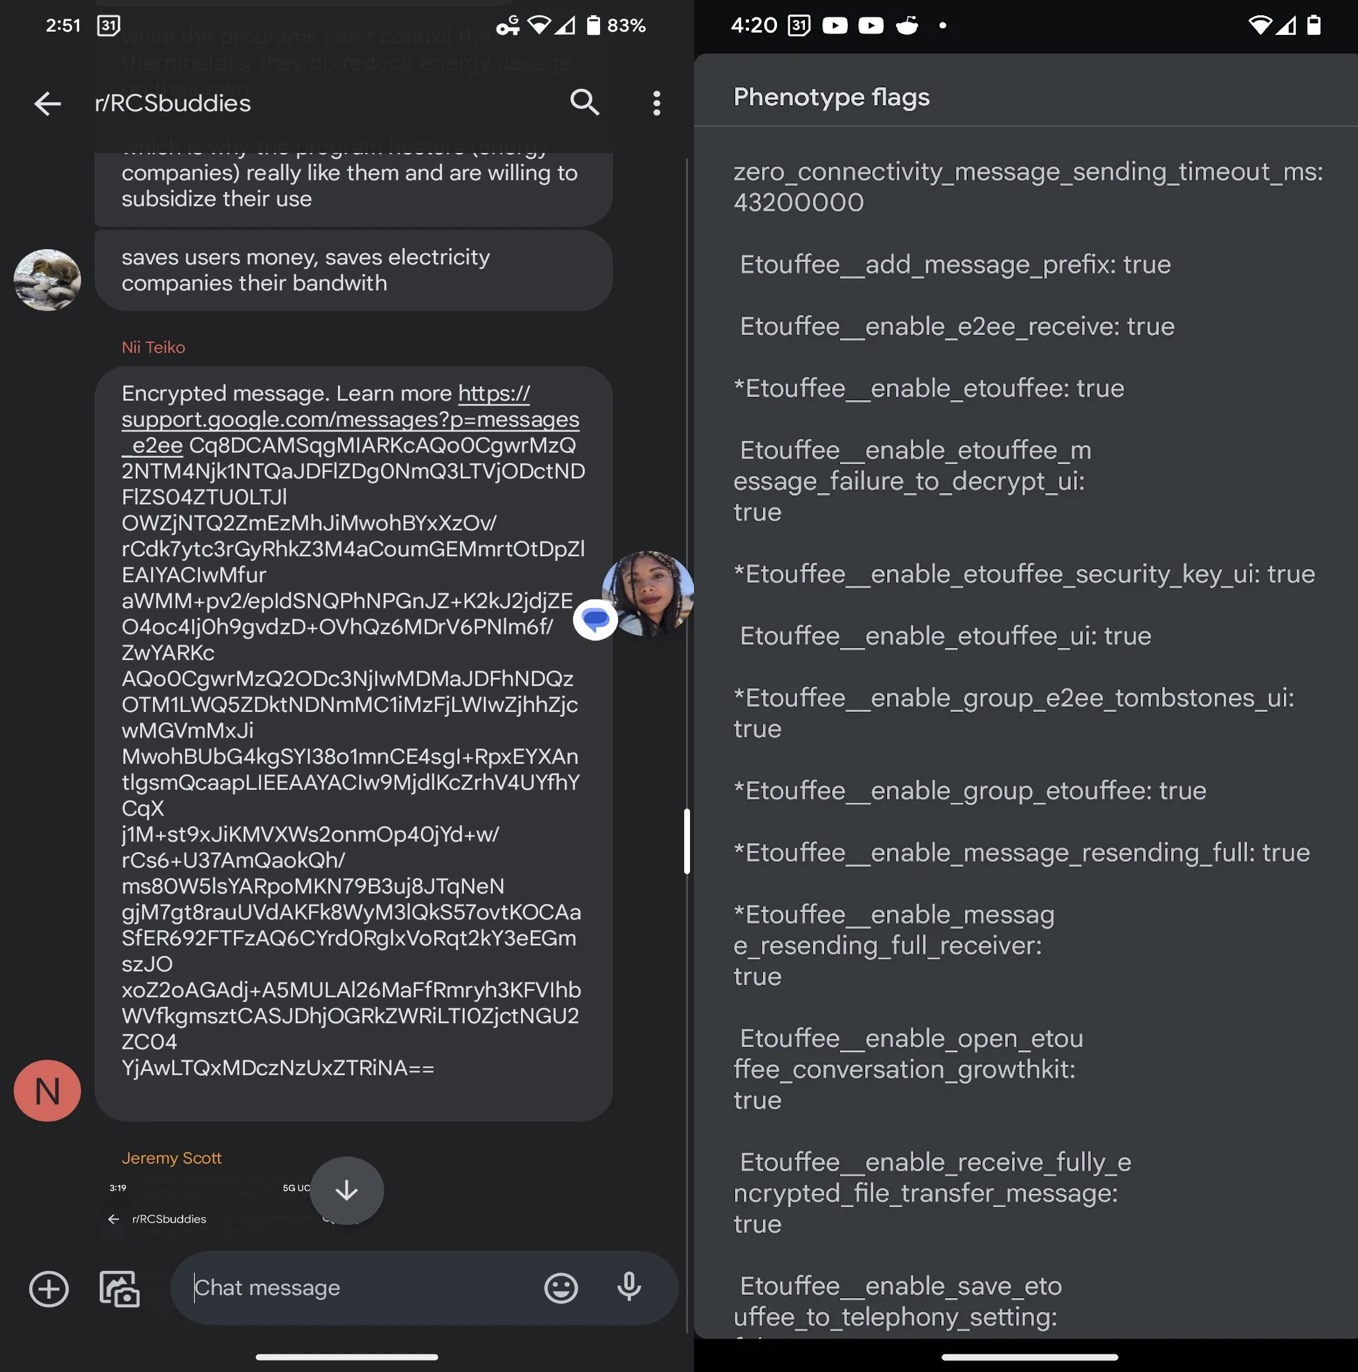 Google will soon introduce end-to-end encryption in RCS group chats